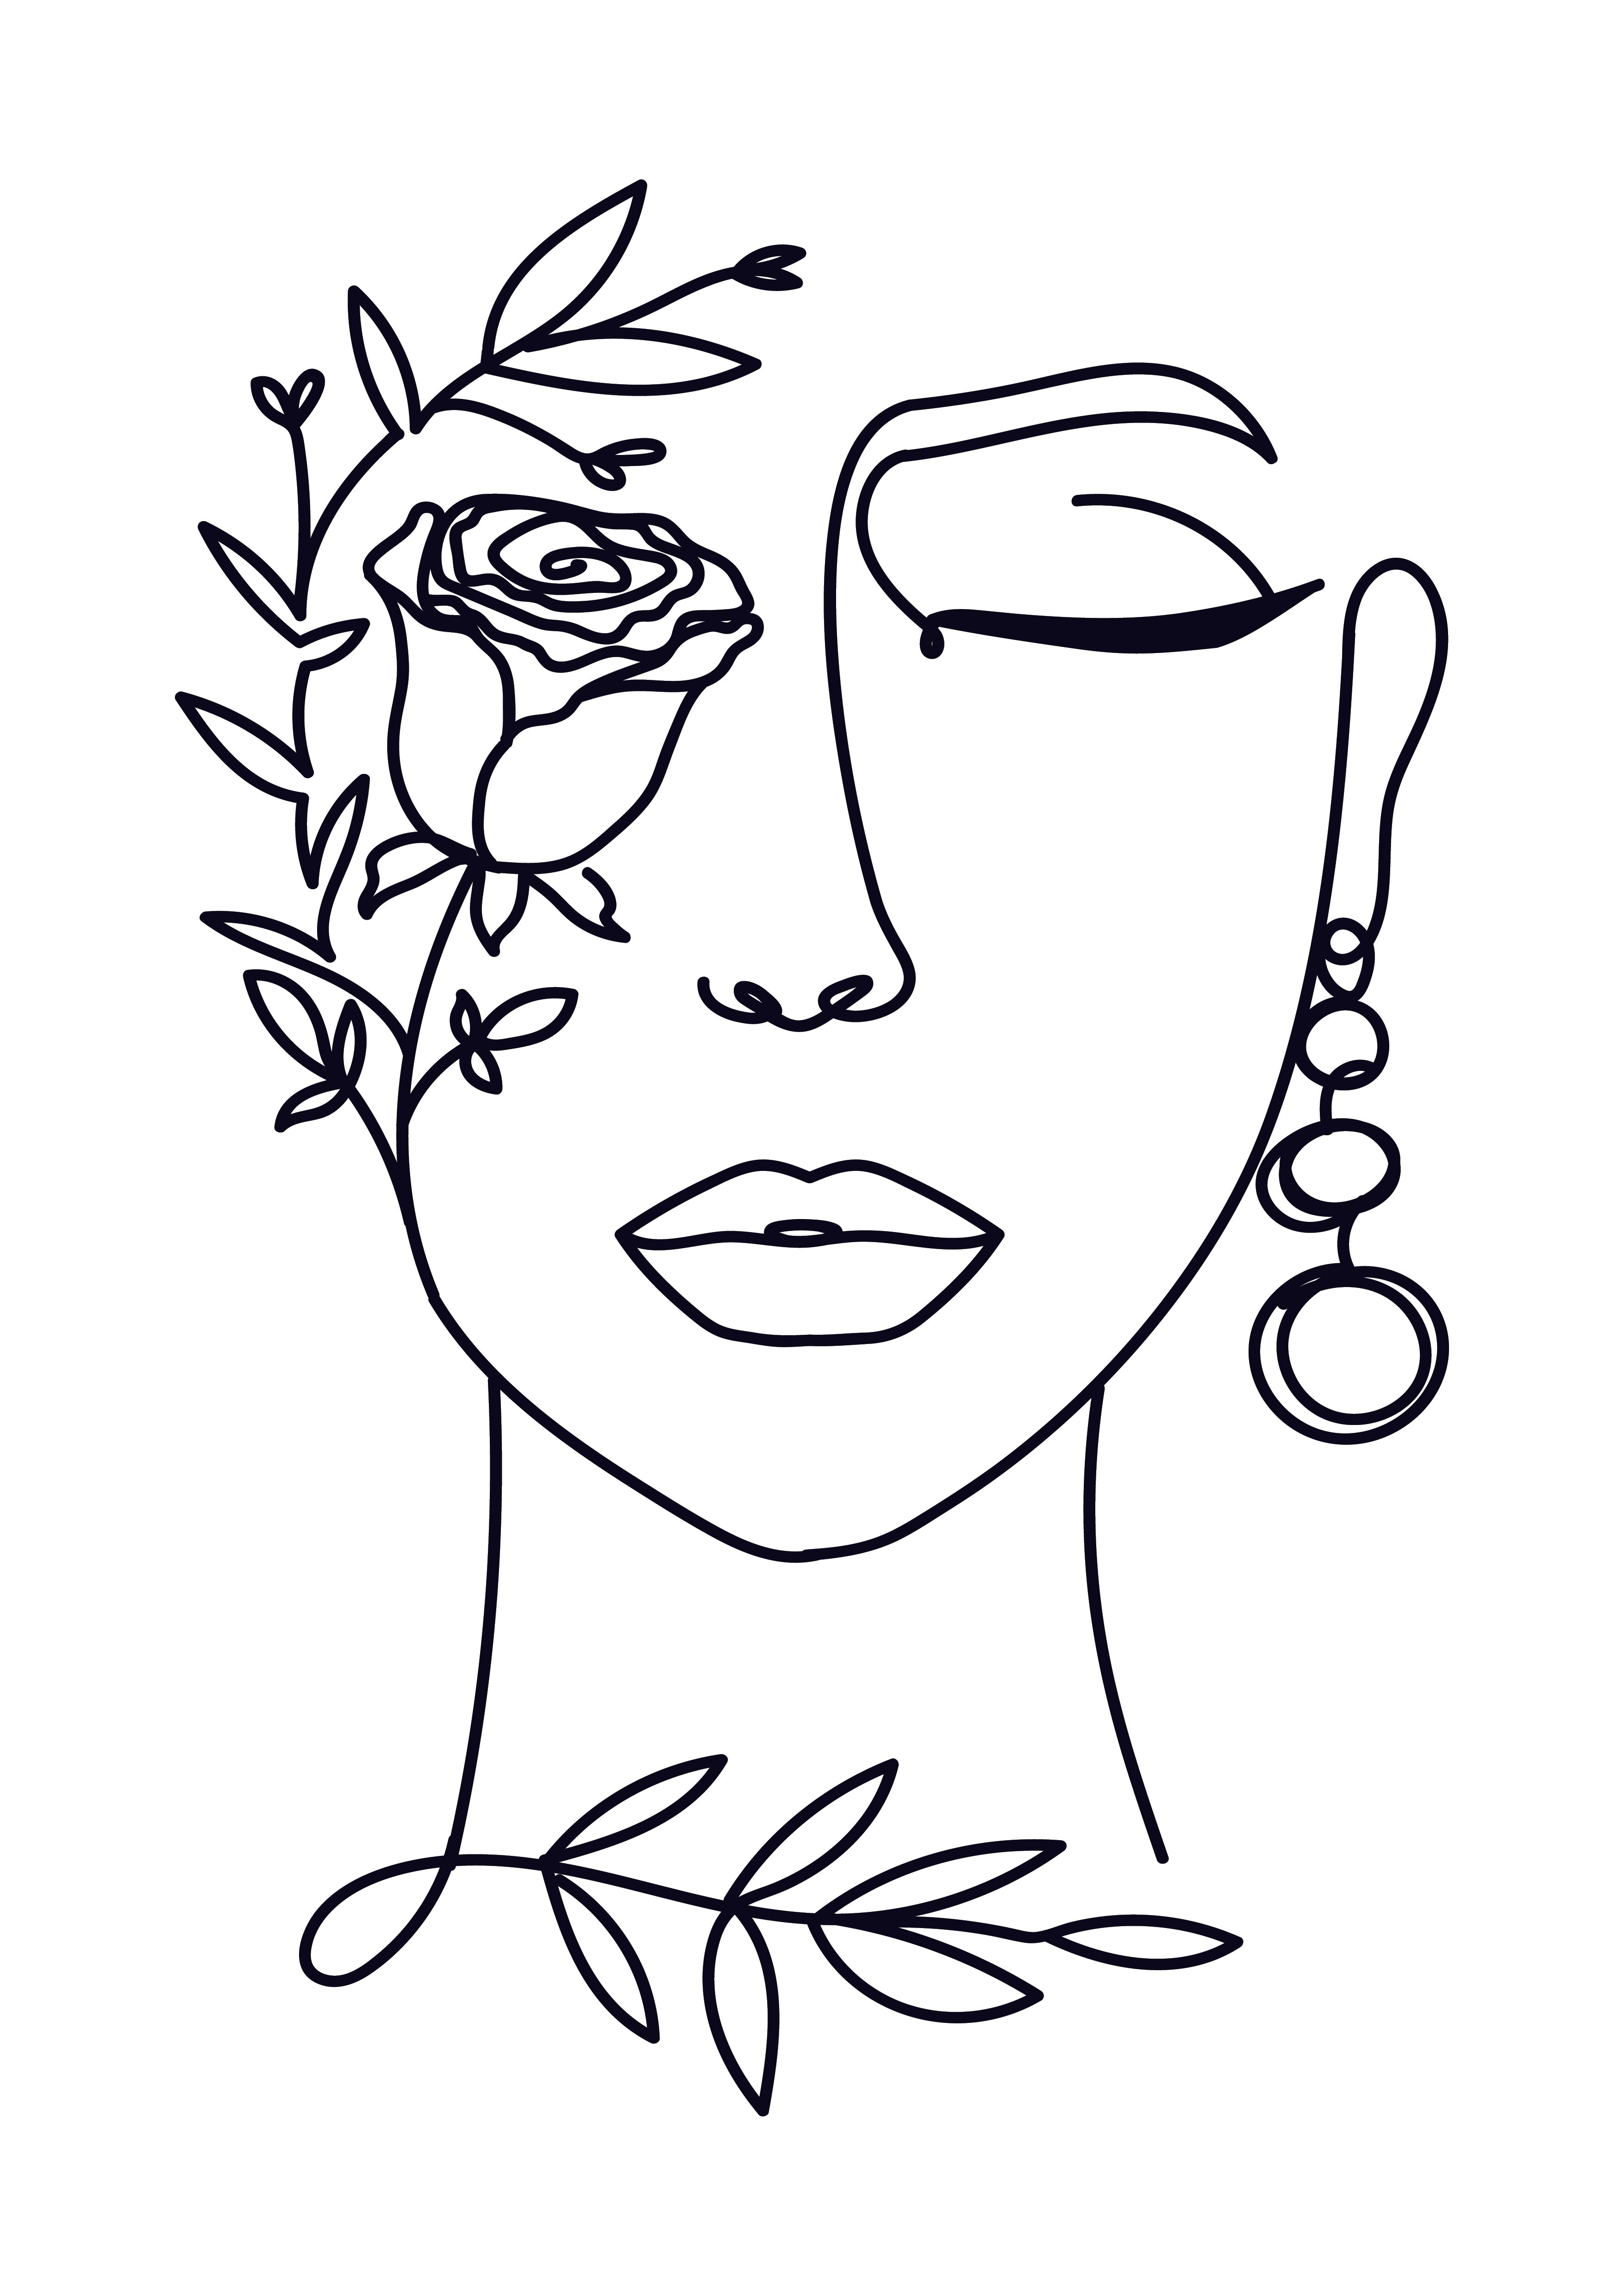 Woman line art Techniques Ideas and 10 Free Vectors to Download